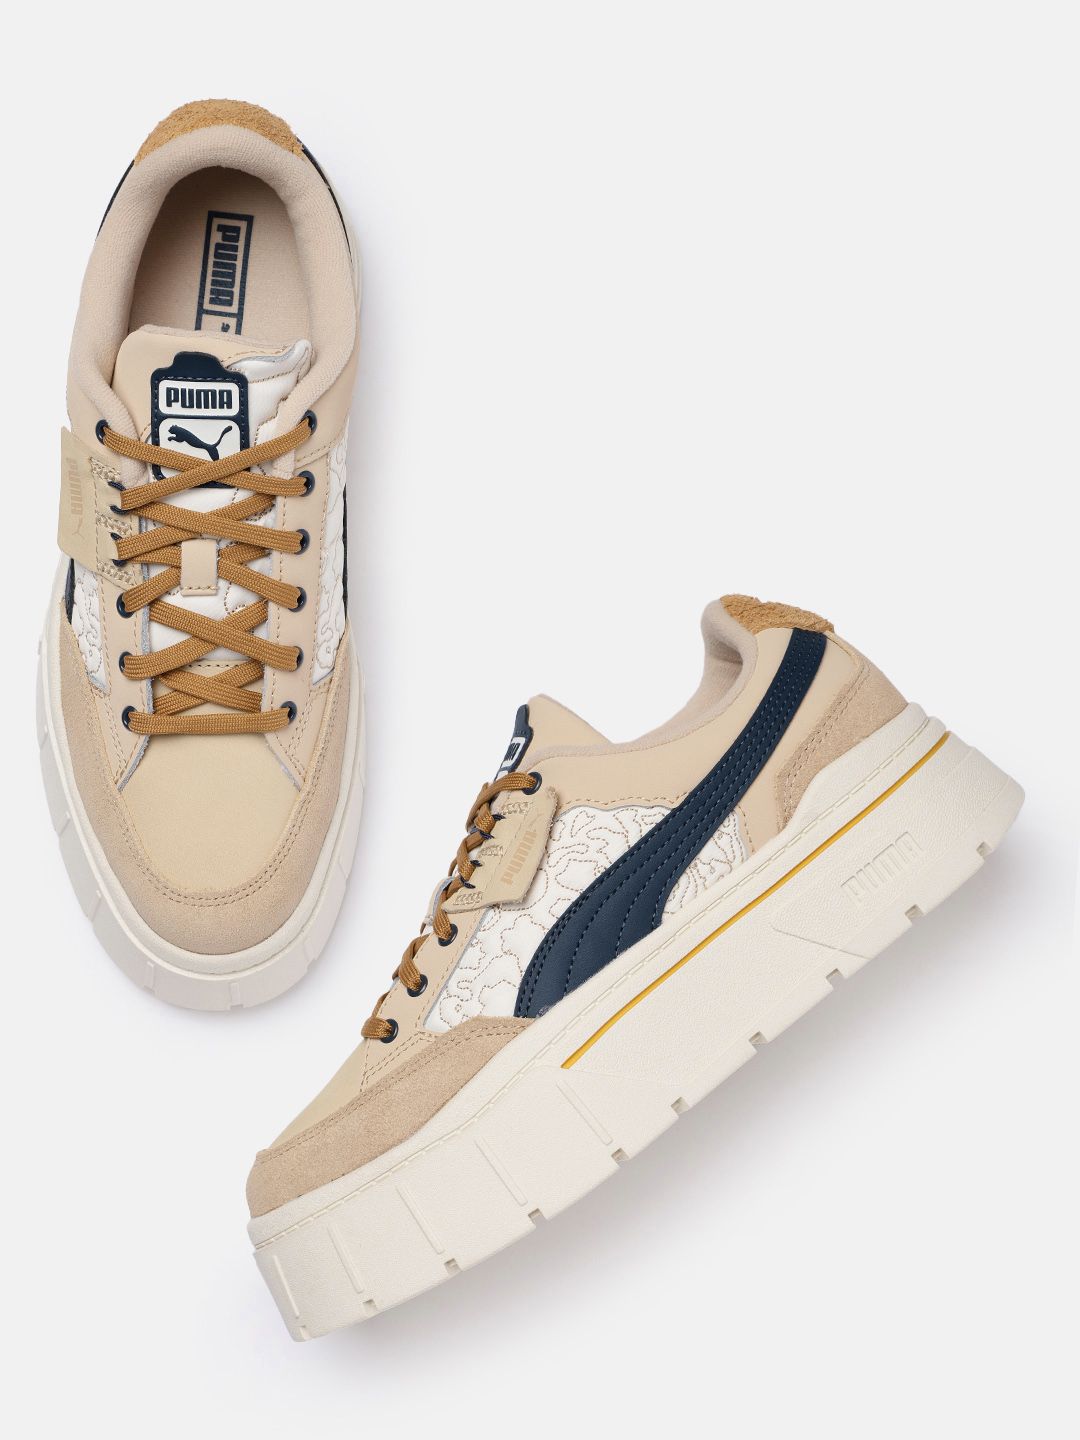 Puma Women Beige Leather Sneakers Price in India